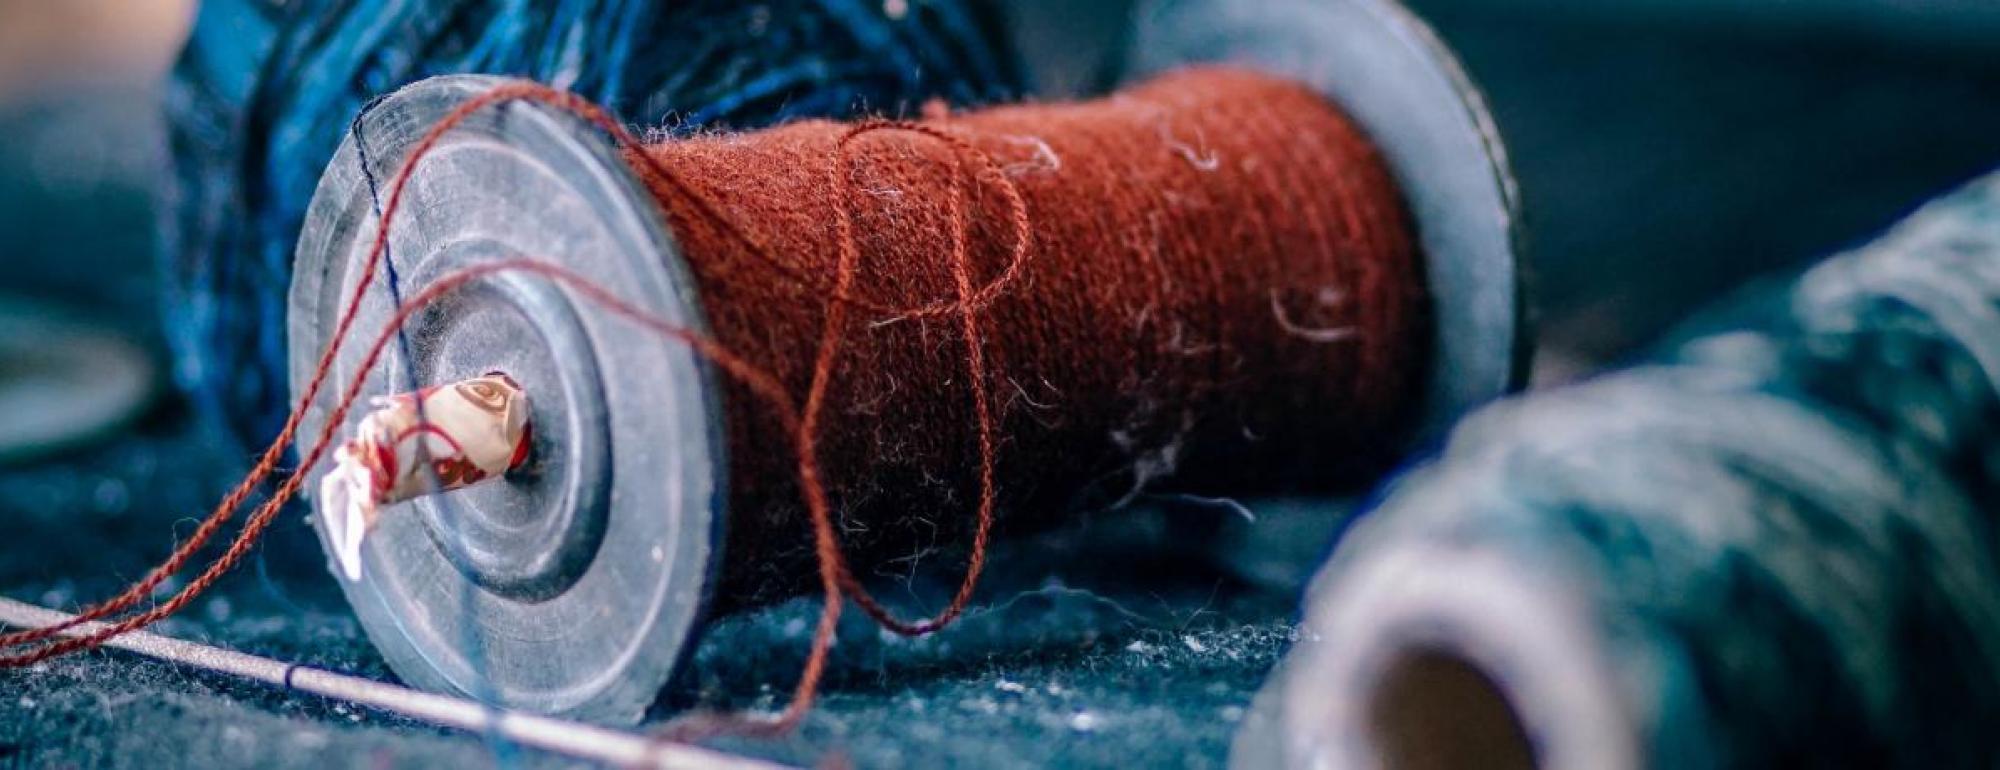 zoomed in image of spools of yarn